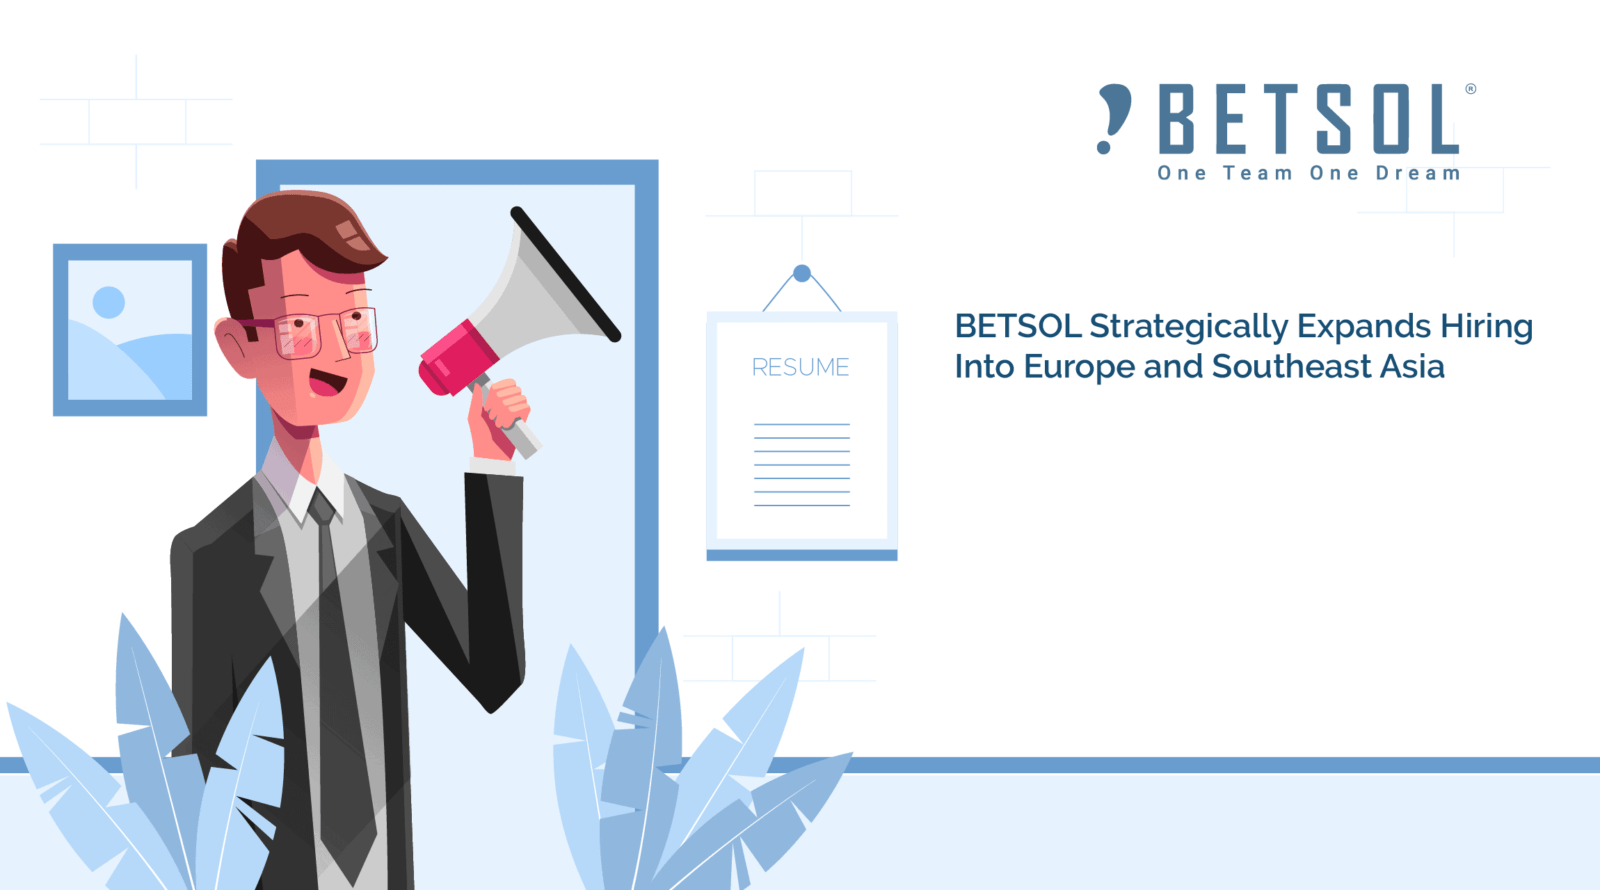 BETSOL Strategically Expands Hiring Into Europe and Southeast Asia